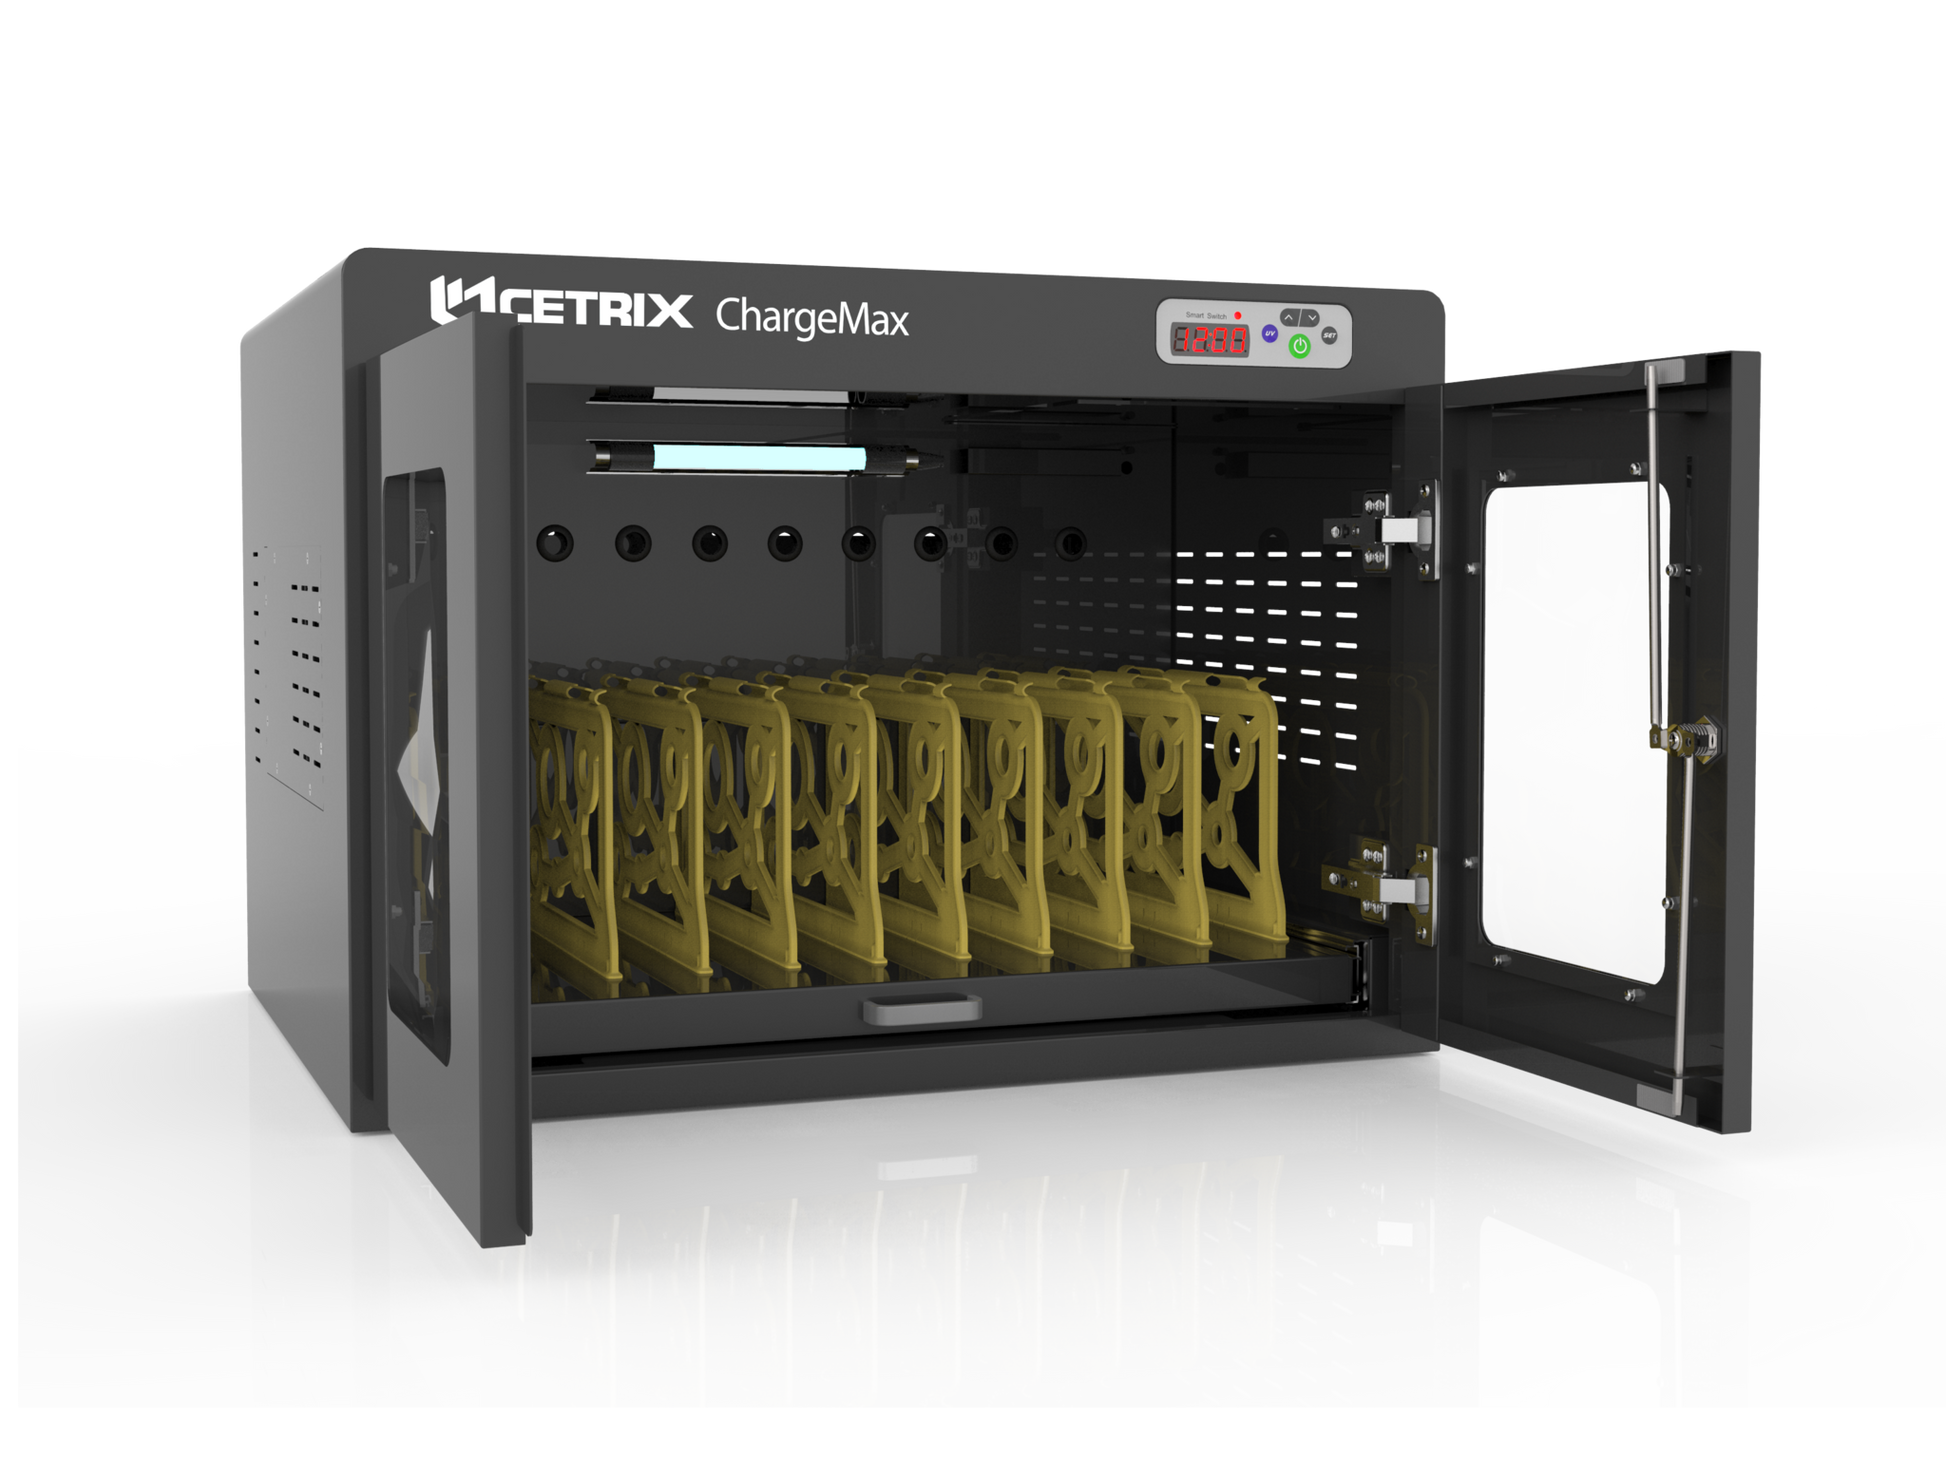 ChargeMax by CETRIX brings advanced UVC disinfection and mobile device charging